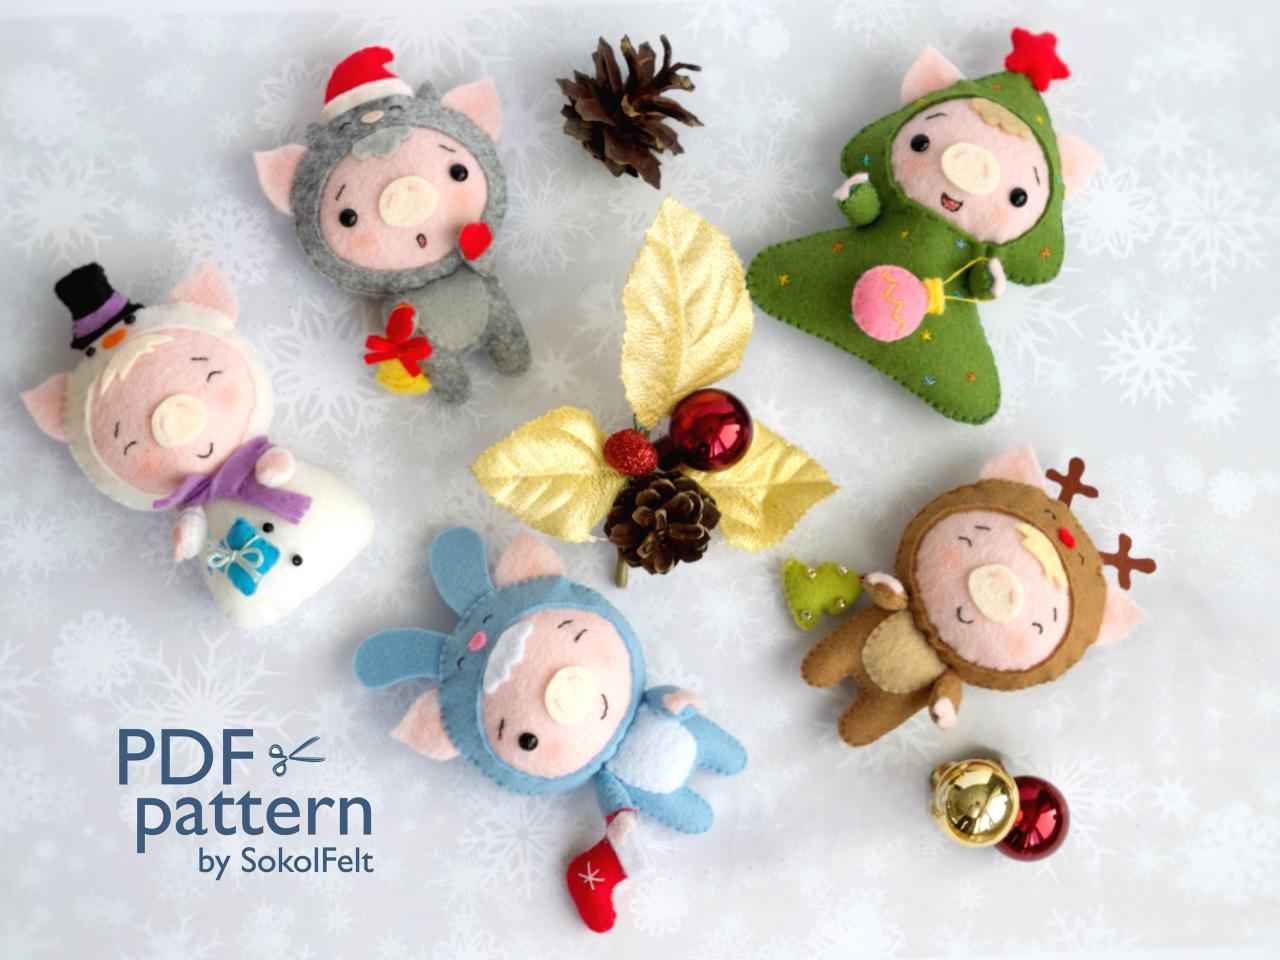 Set Of 5 Christmas Pig Toy Sewing Pdf Patterns, Pig Ornament Set, Piglet Pattern For Baby Crib Mobile, Christmas Pig Ornaments